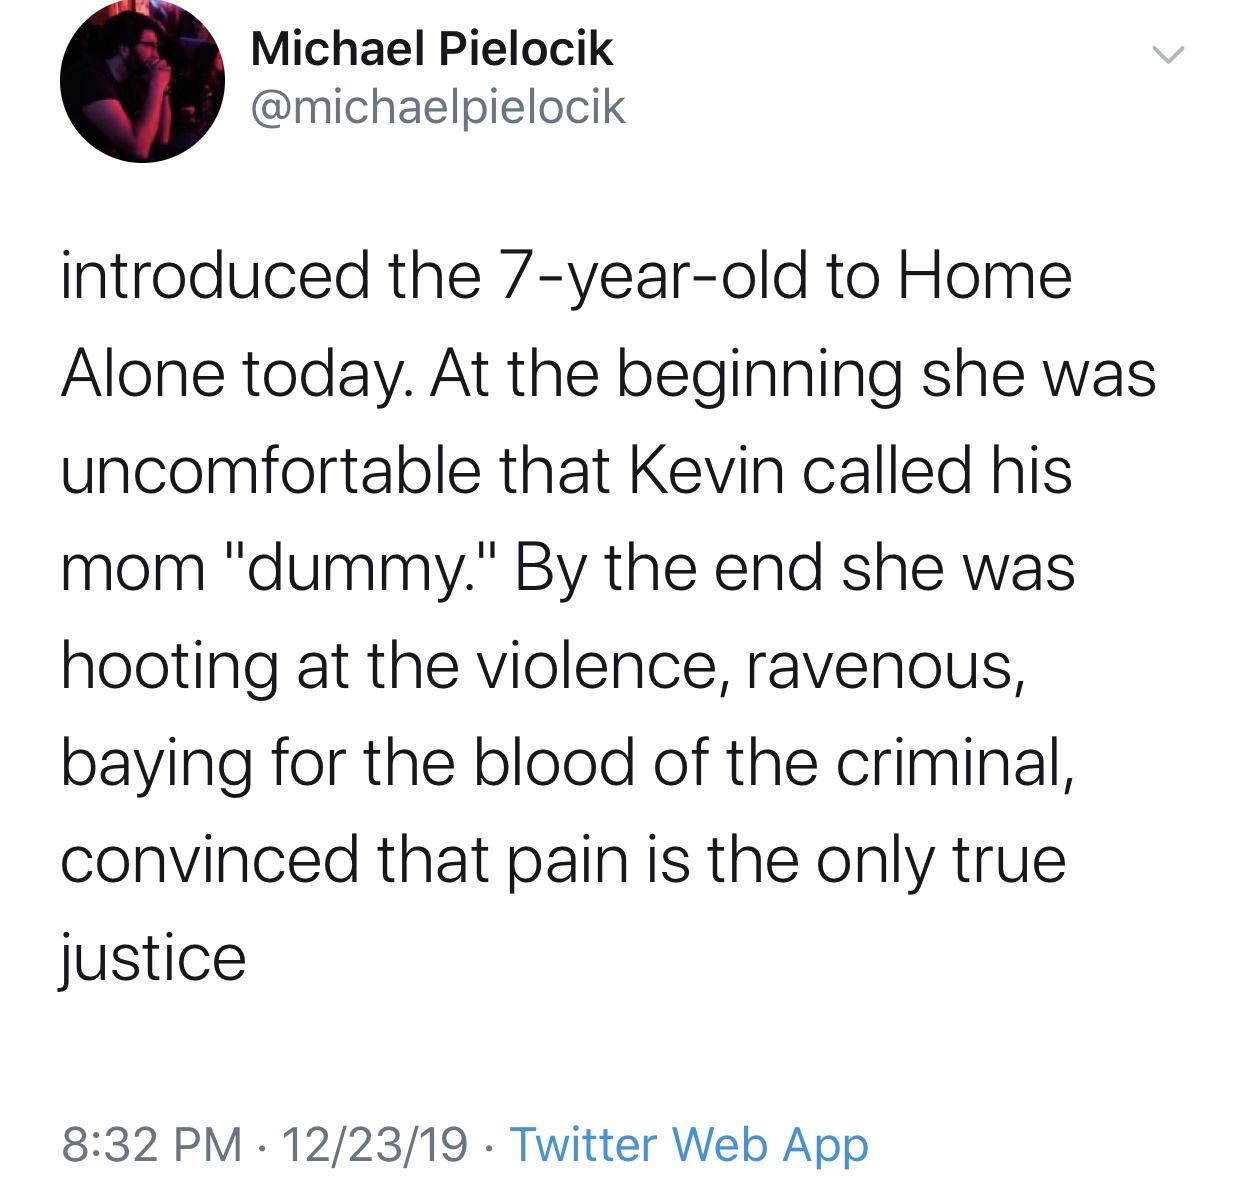 donald trump state of the union tweet - Michael Pielocik introduced the 7yearold to Home Alone today. At the beginning she was uncomfortable that Kevin called his mom "dummy." By the end she was hooting at the violence, ravenous, baying for the blood of t